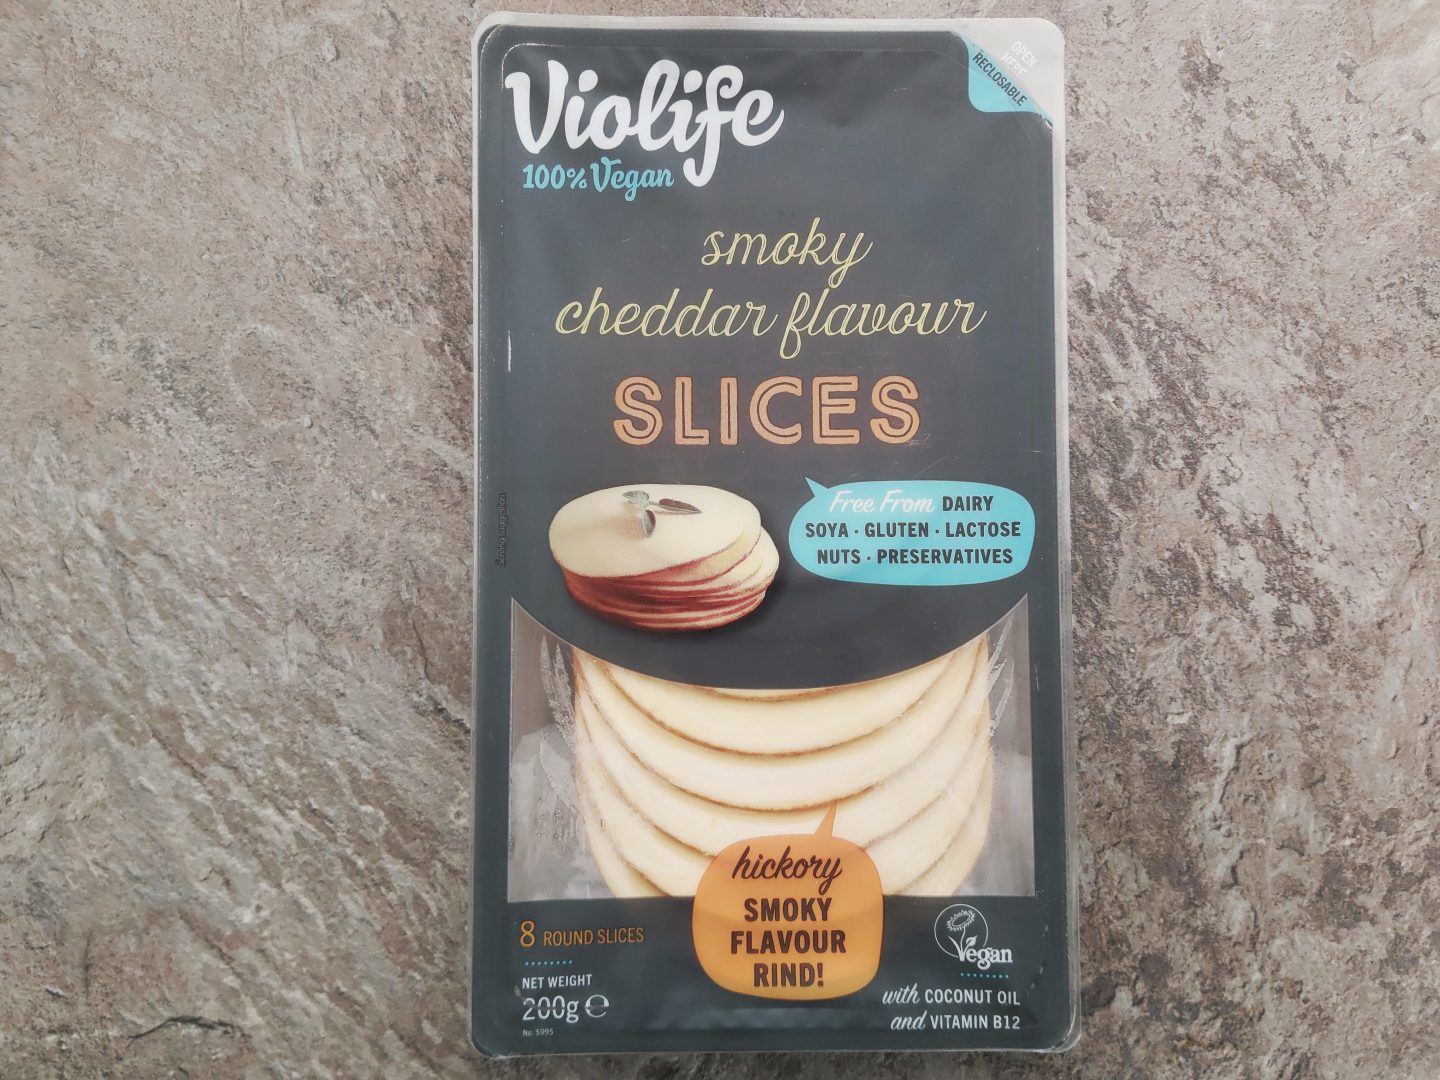 Packet of Violife smoky cheddar flavour slices